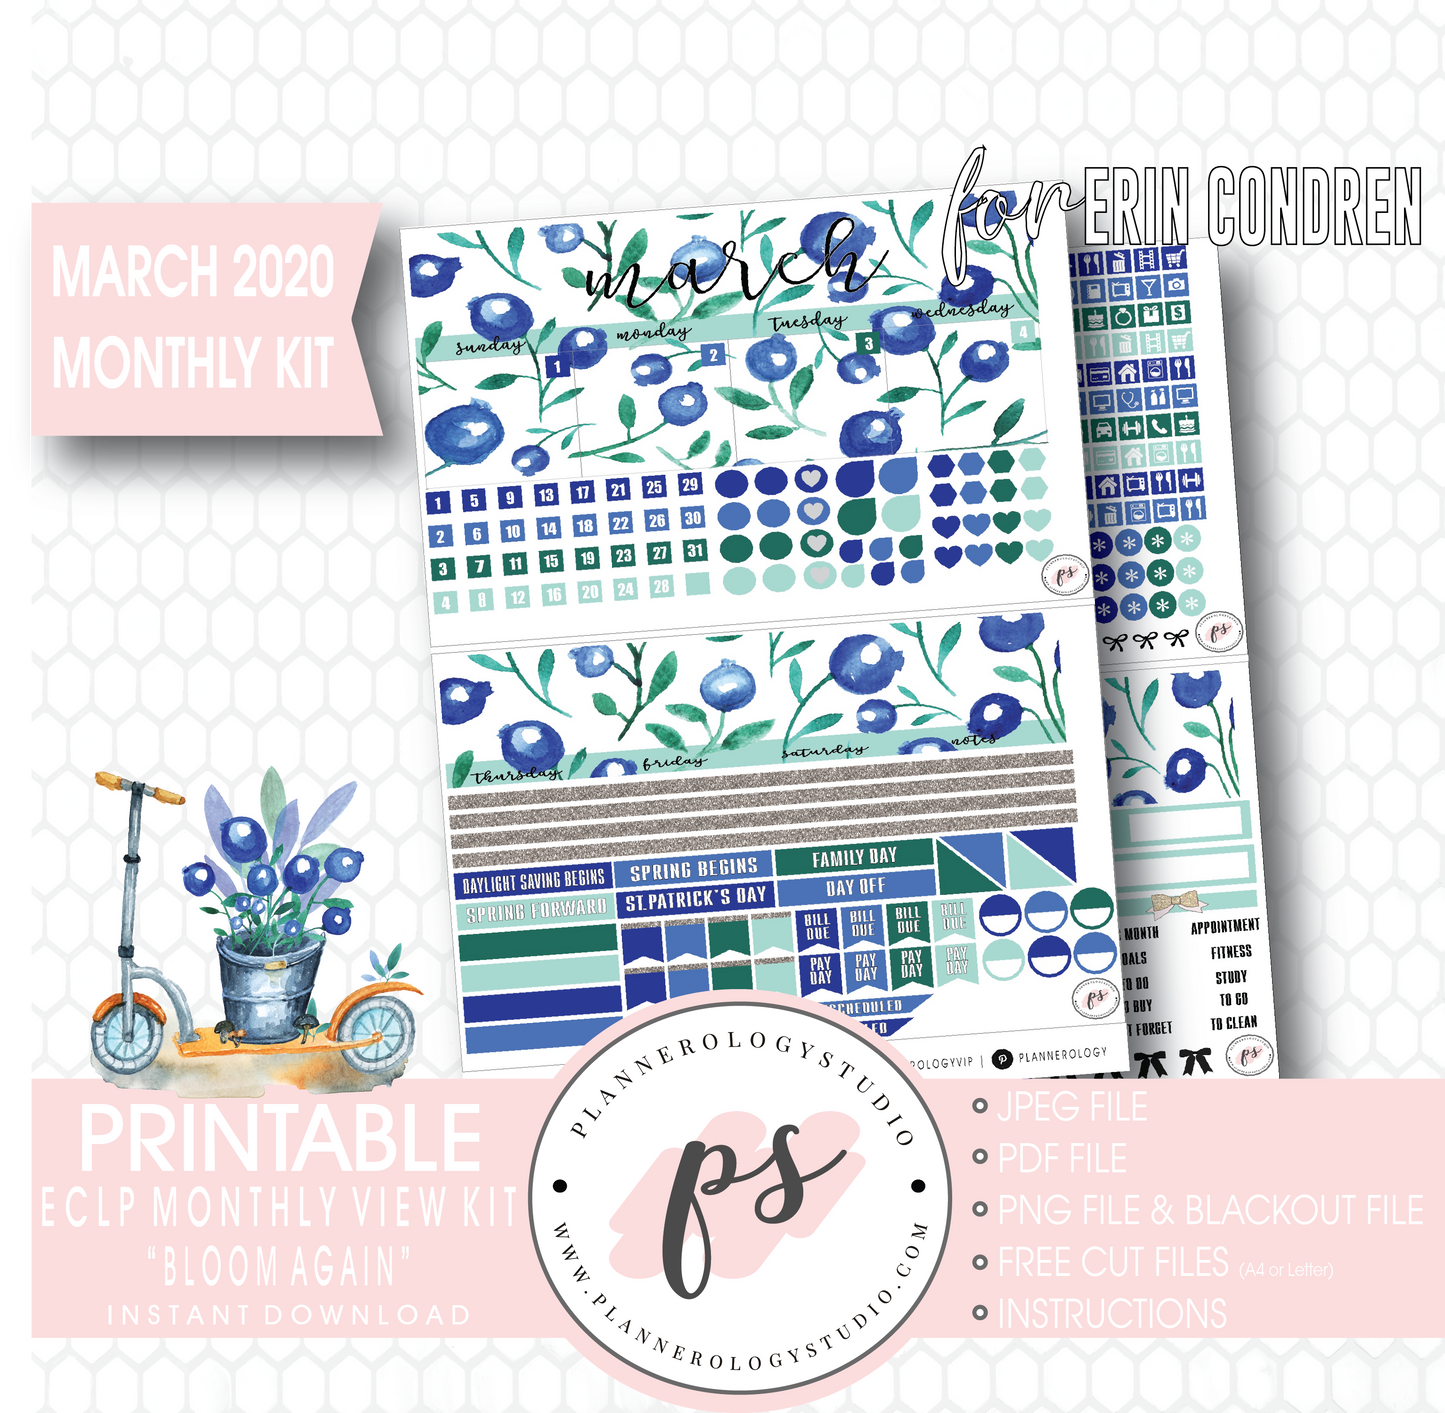 Bloom Again March 2020 Monthly View Kit Digital Printable Planner Stickers (for use with Erin Condren) - Plannerologystudio